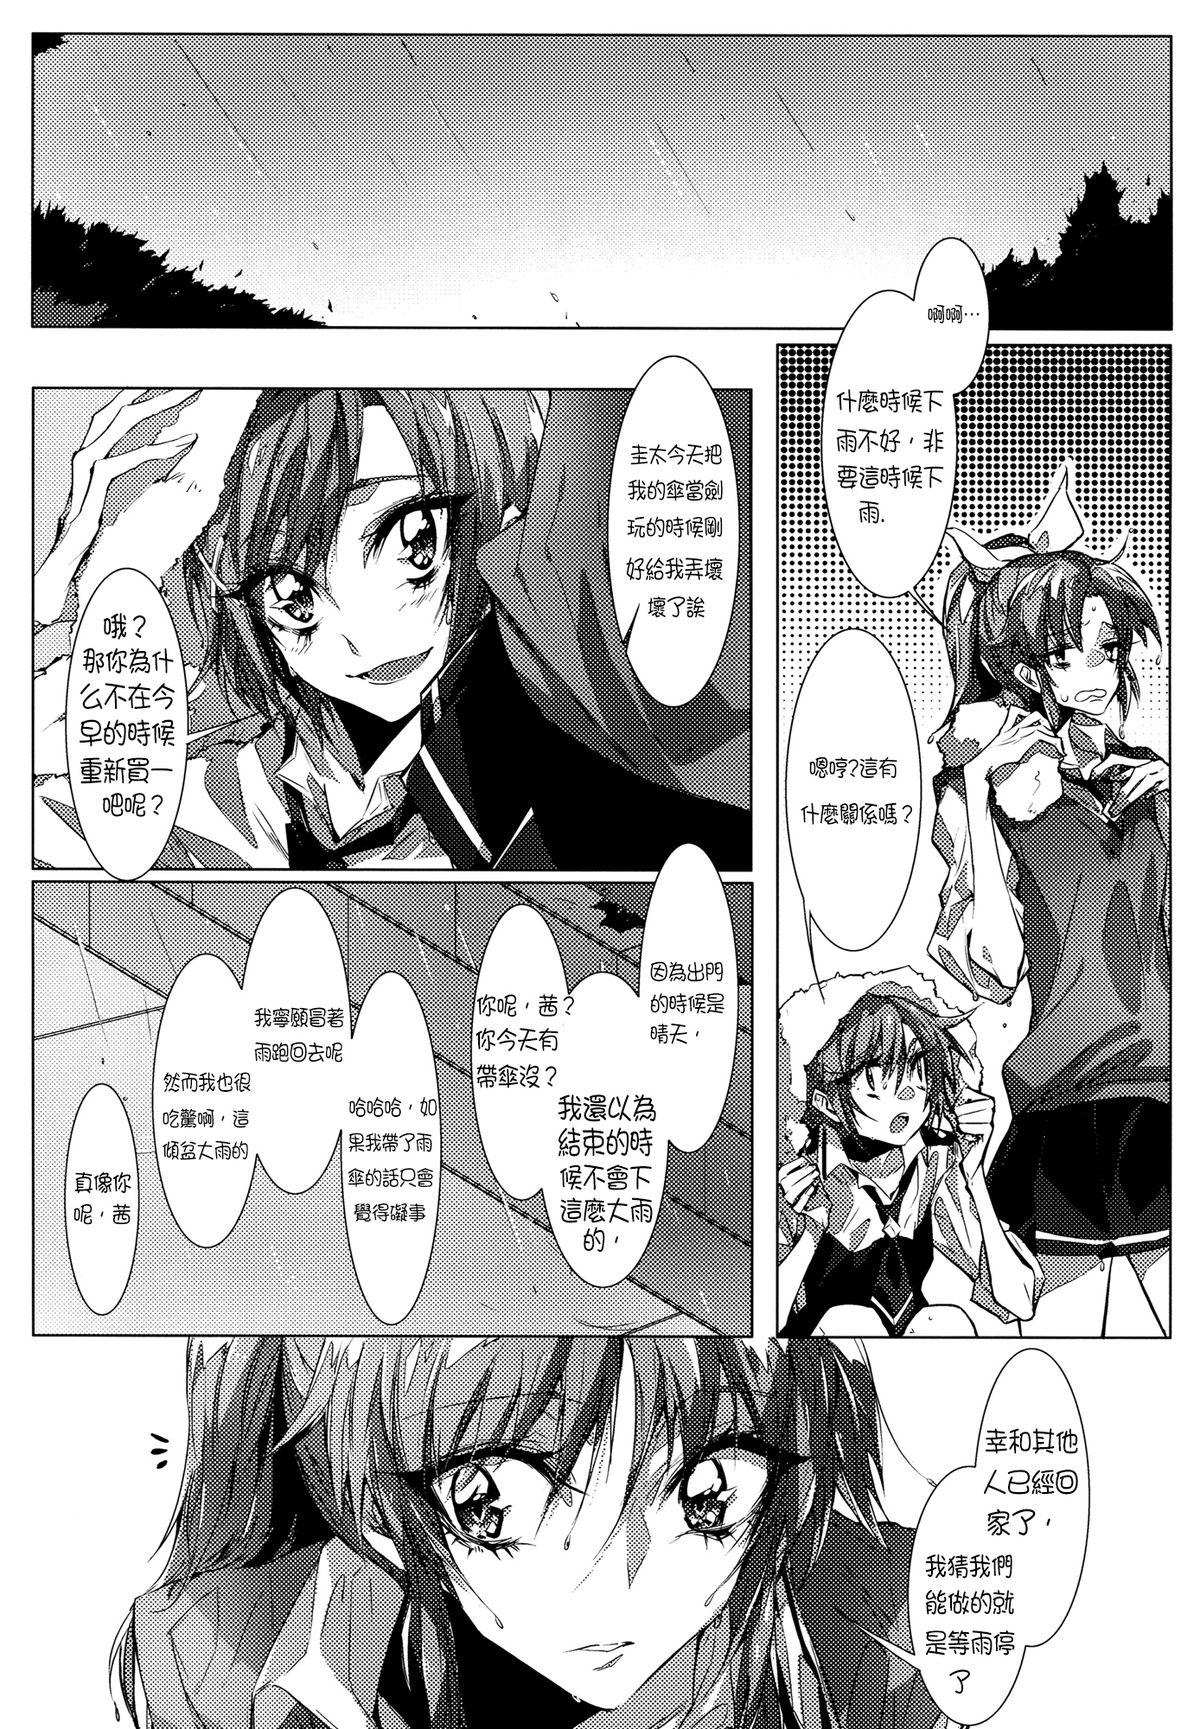 Gag Houkago 23 | After School 23 - Smile precure Fist - Page 3